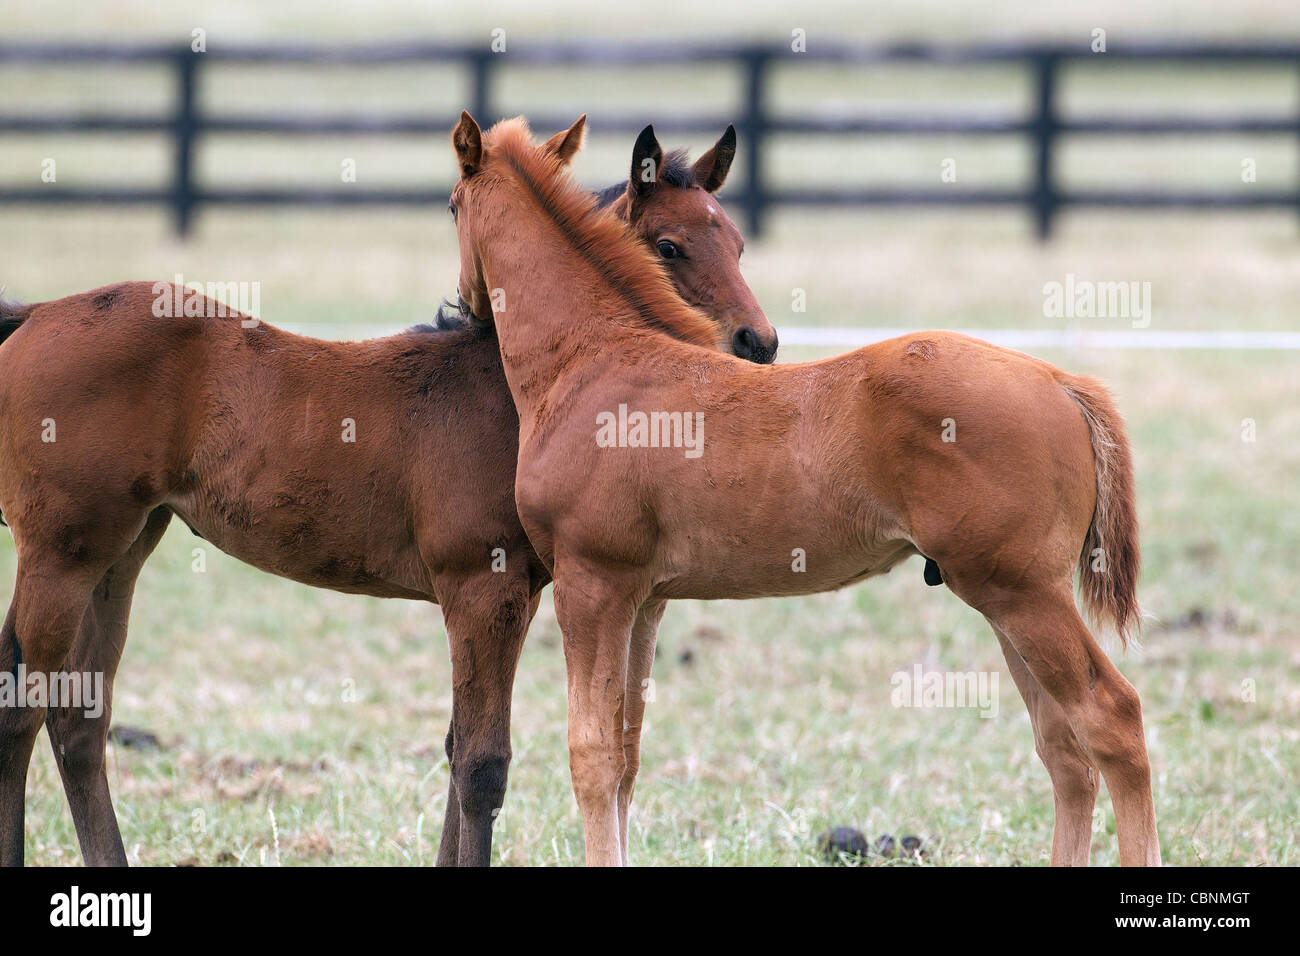 Thoroughbred race horses and foals in paddocks at Cambridge Thoroughbred Lodge, Cambridge, Waikato, New Zealand Stock Photo